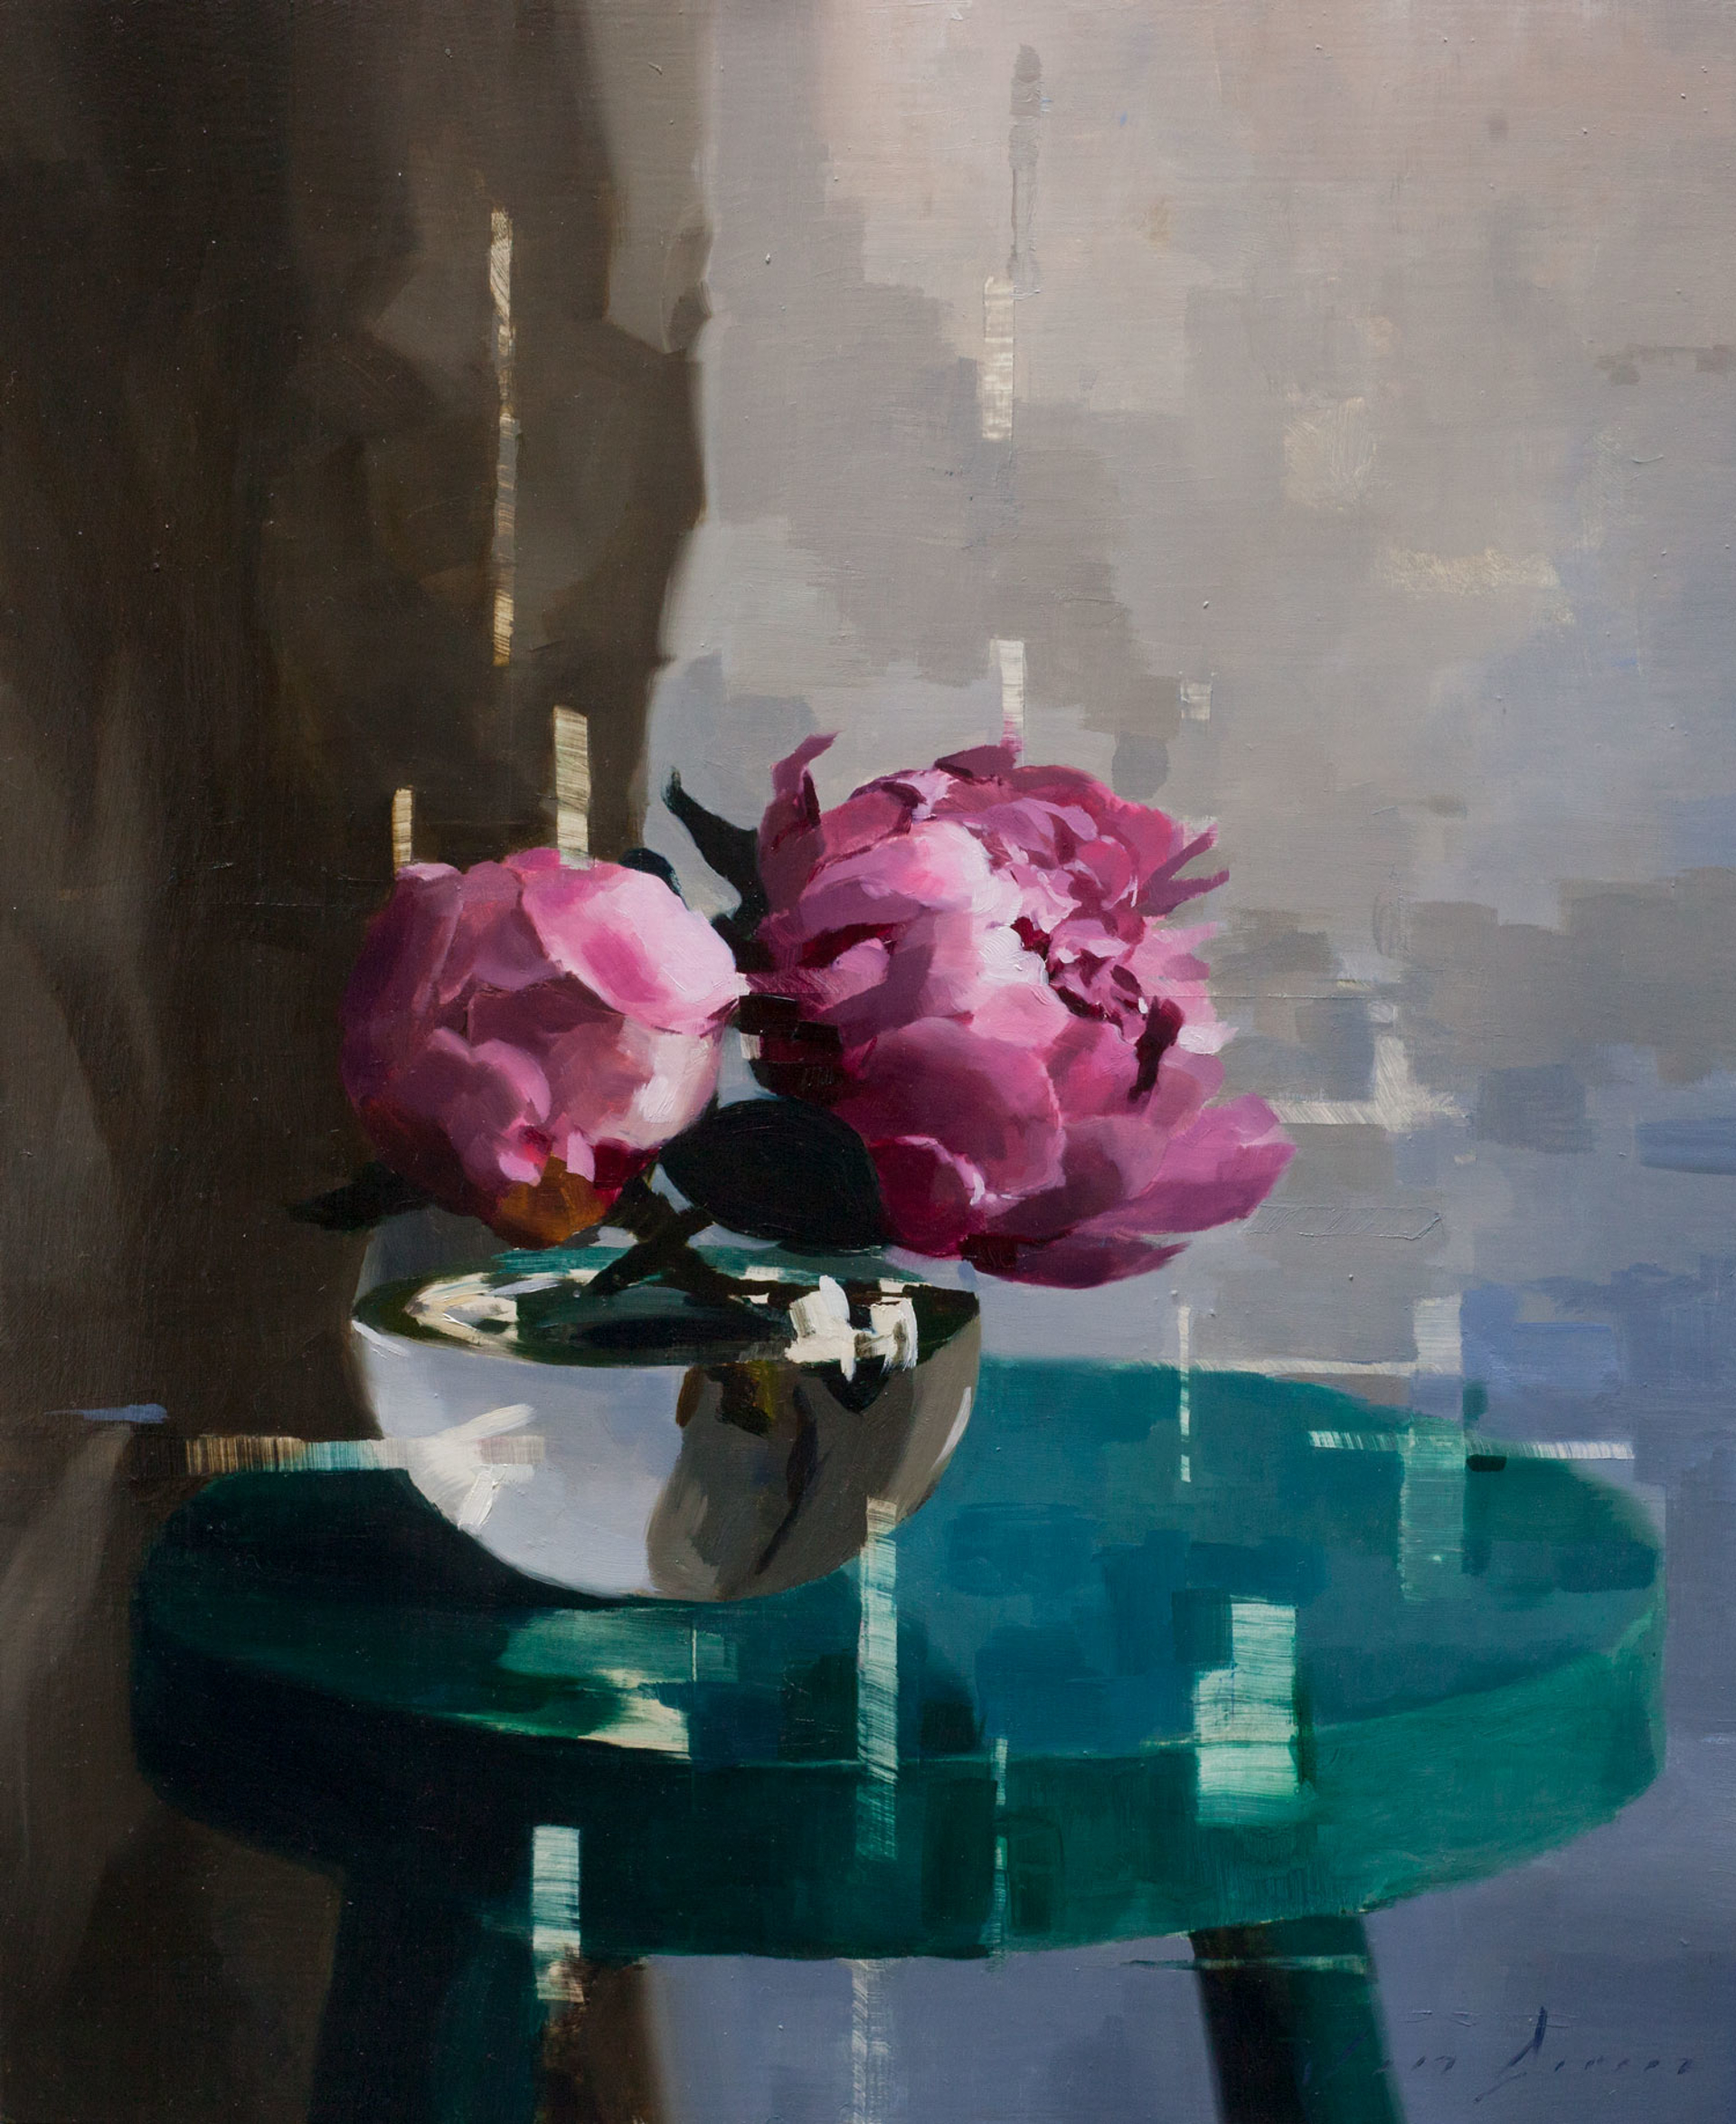 Peonies in the Afternoon by Jon Doran